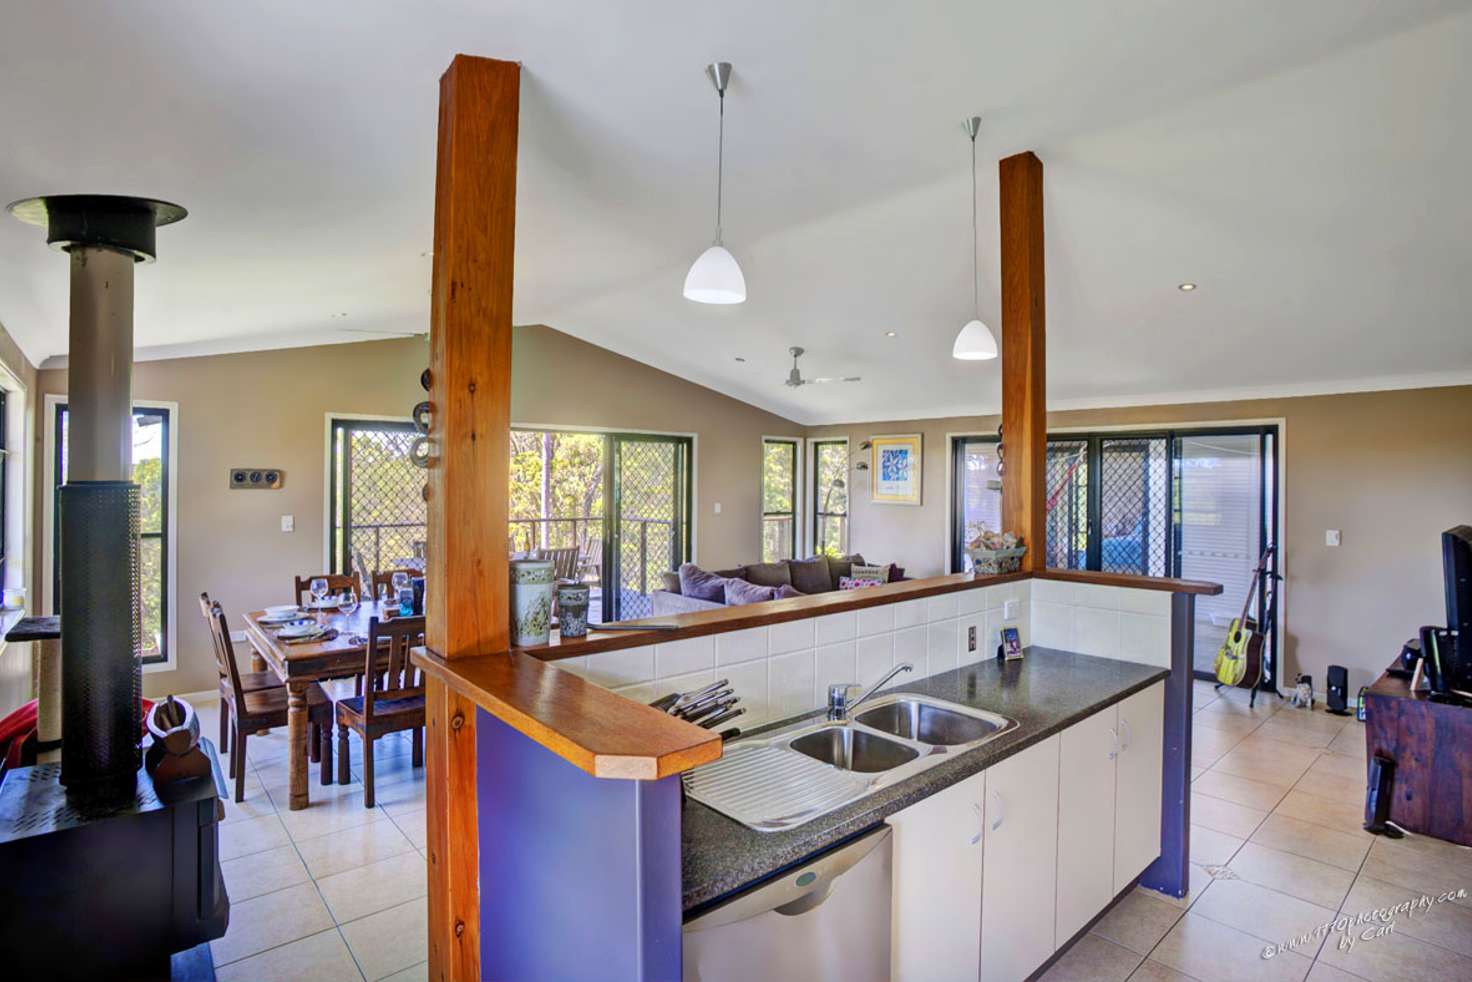 Main view of Homely house listing, 1005 MURPHY RD, Captain Creek QLD 4677